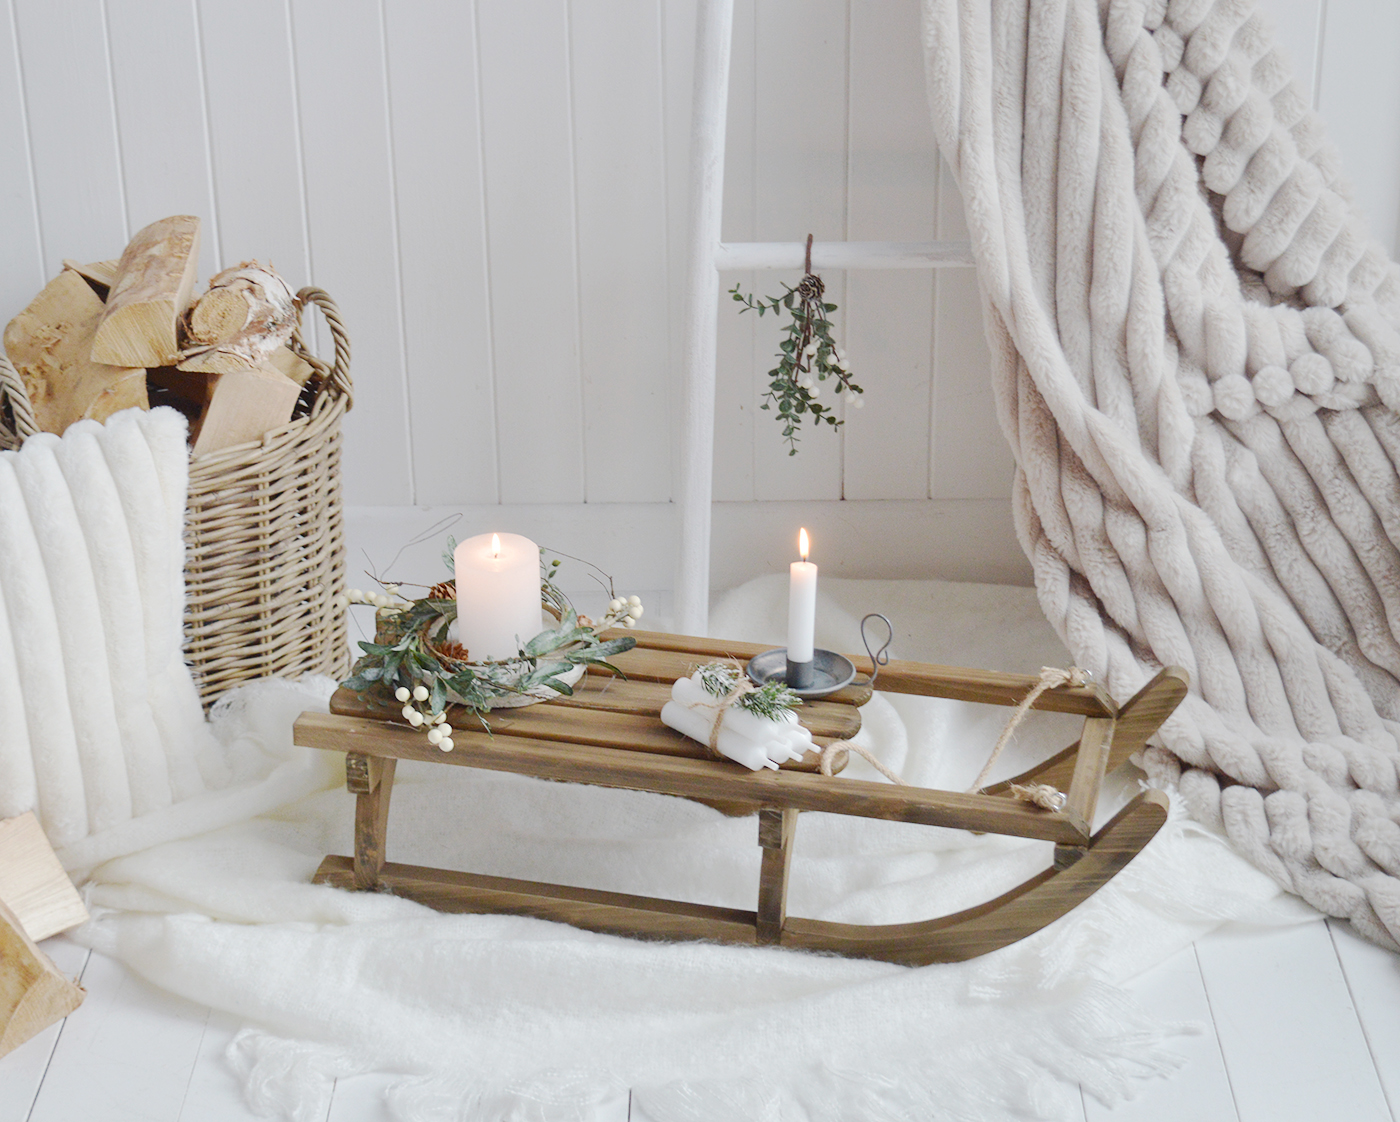 Wooden Sleigh for New England Christmas decorations, shown her with our white berries winter wreath and candles for an timeless Christmas style in coastal and modern farmhouse homes